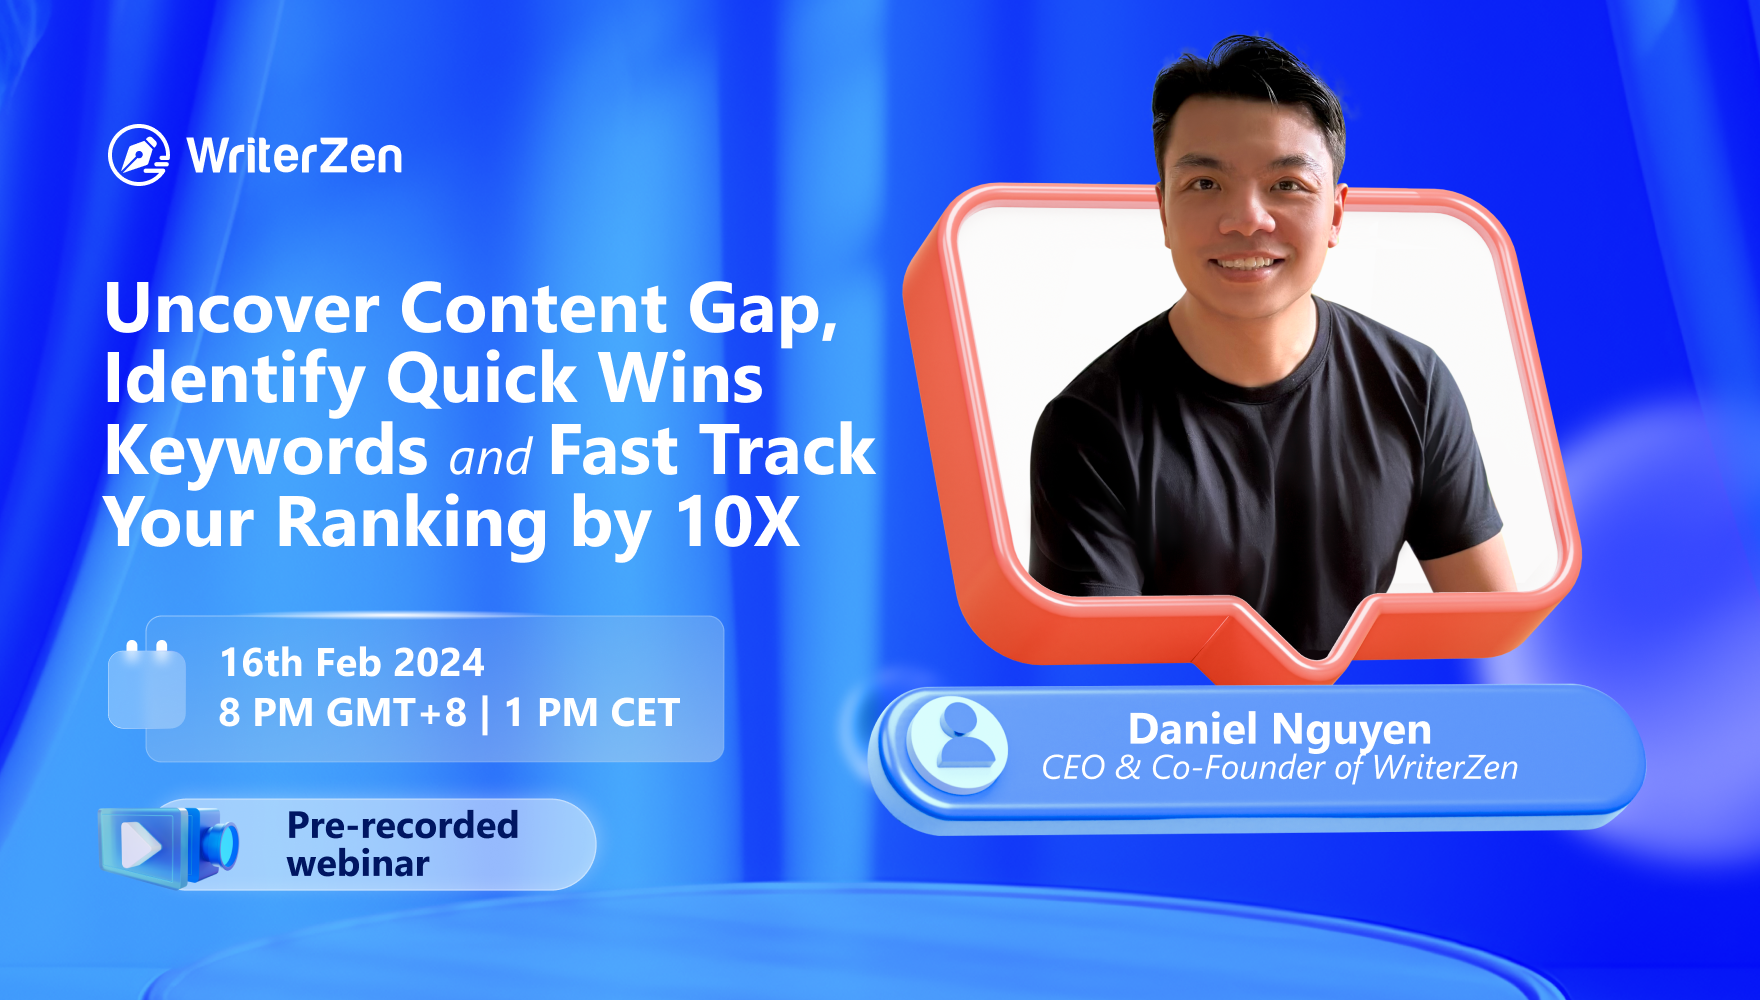 Uncover Content Gap, Identify Quick Wins Keywords and Fast Track Your Ranking by 10X